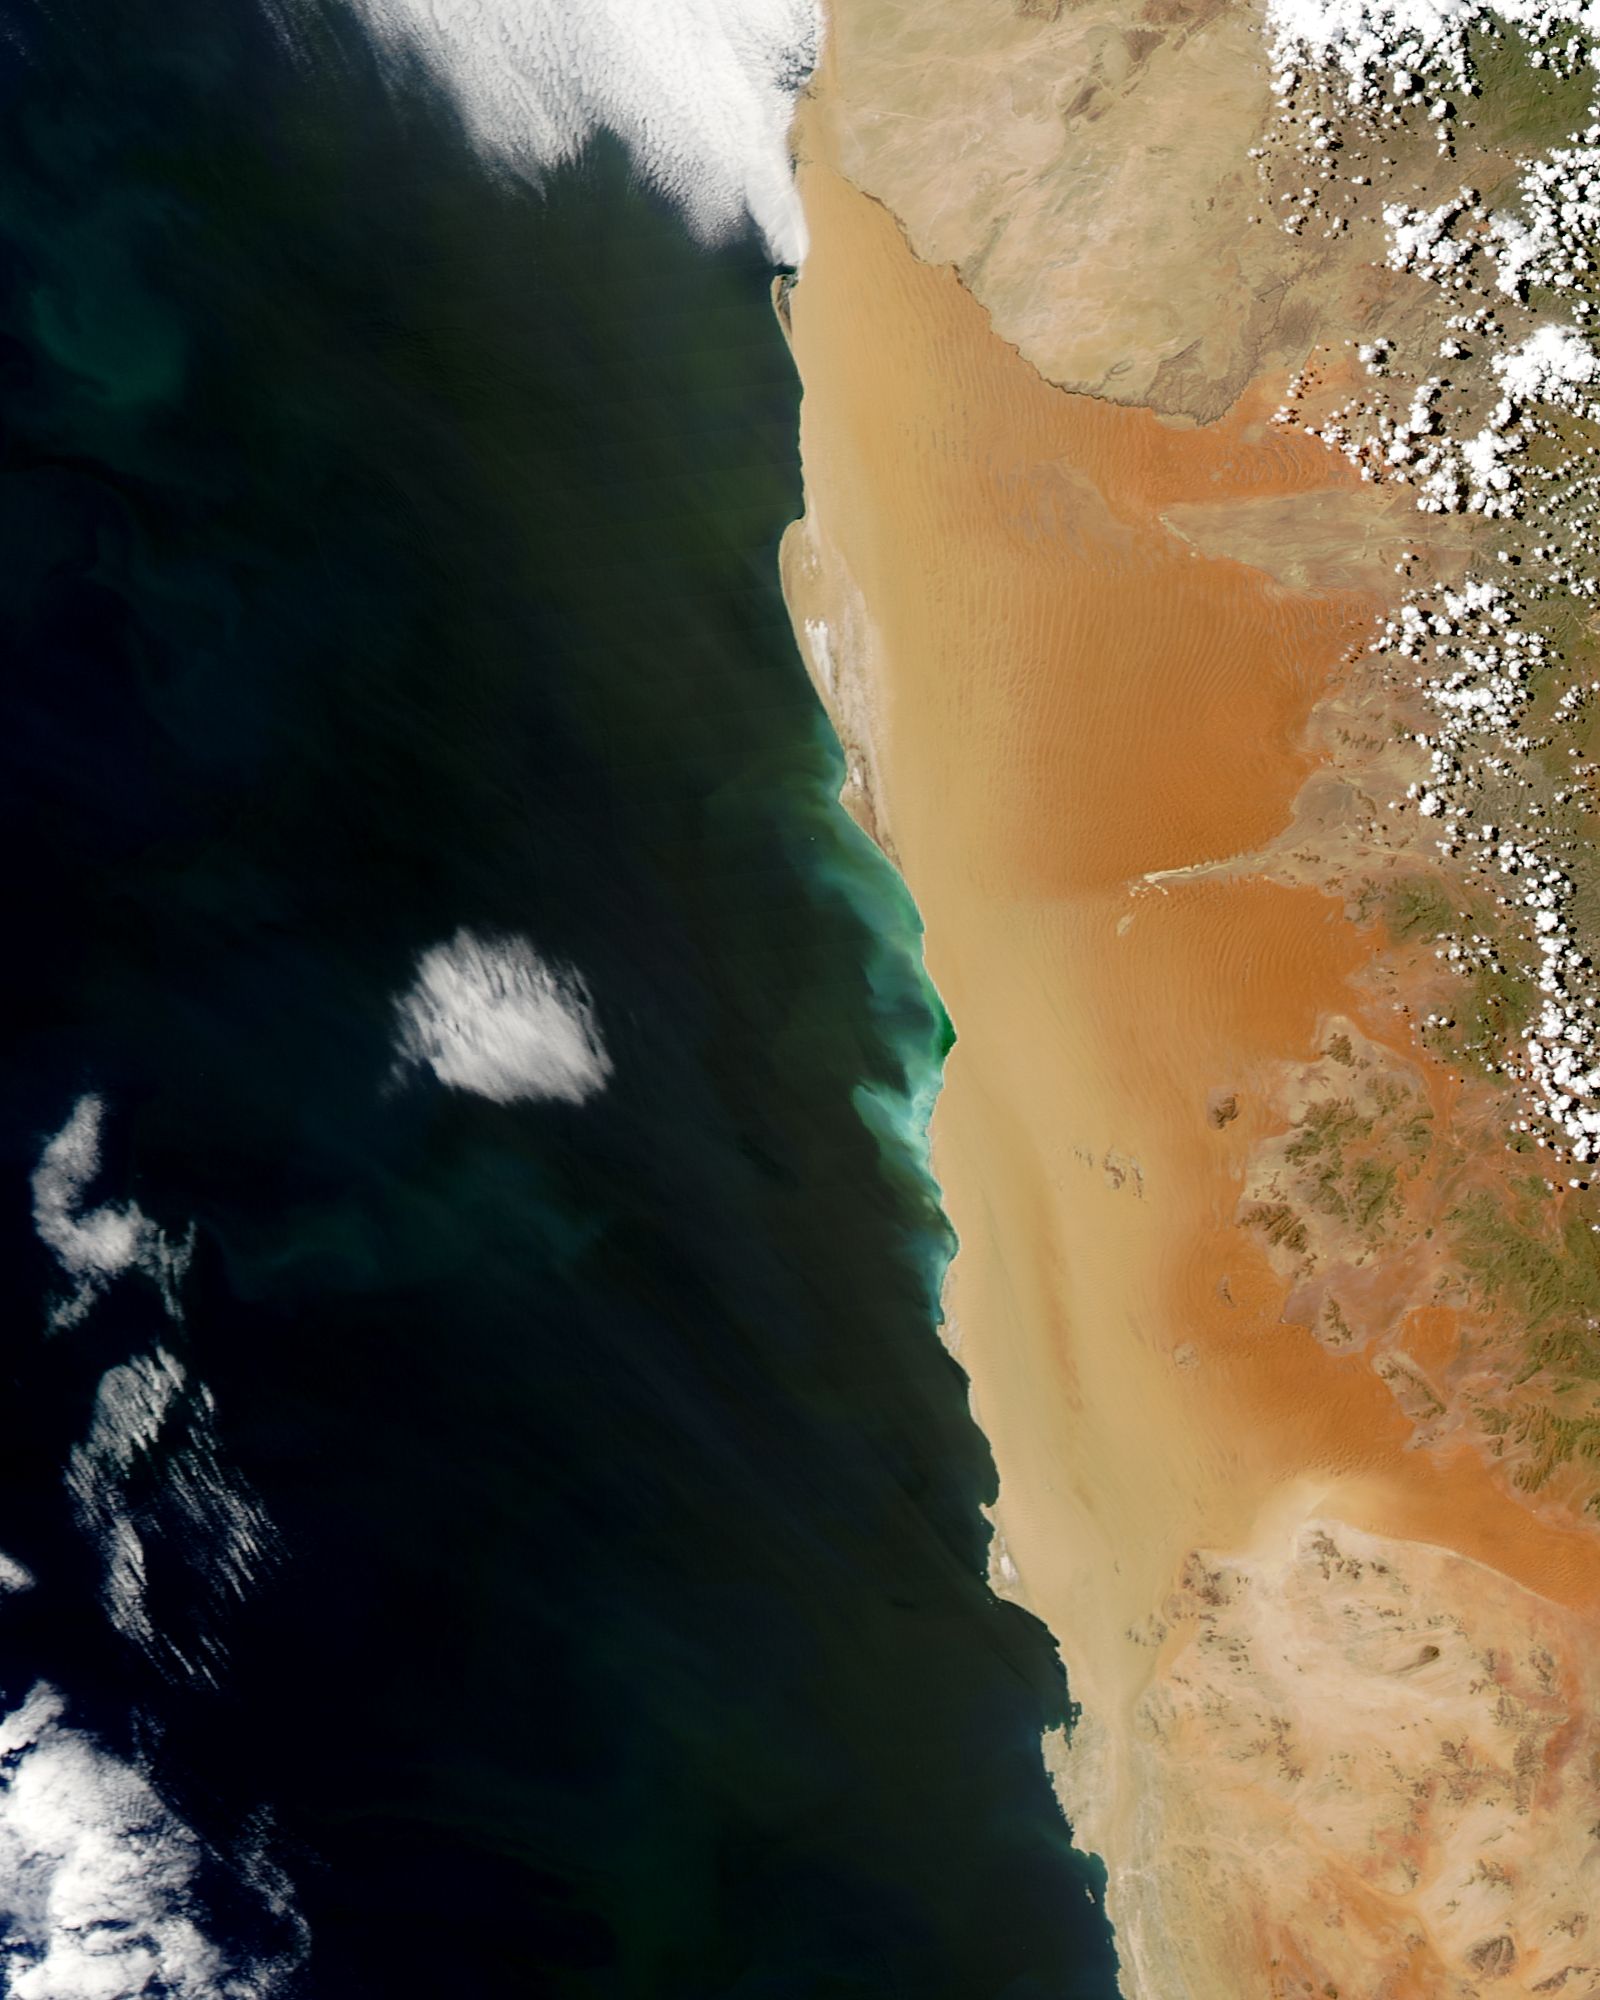 Hydrogen Sulfide Emissions off of Africa - related image preview